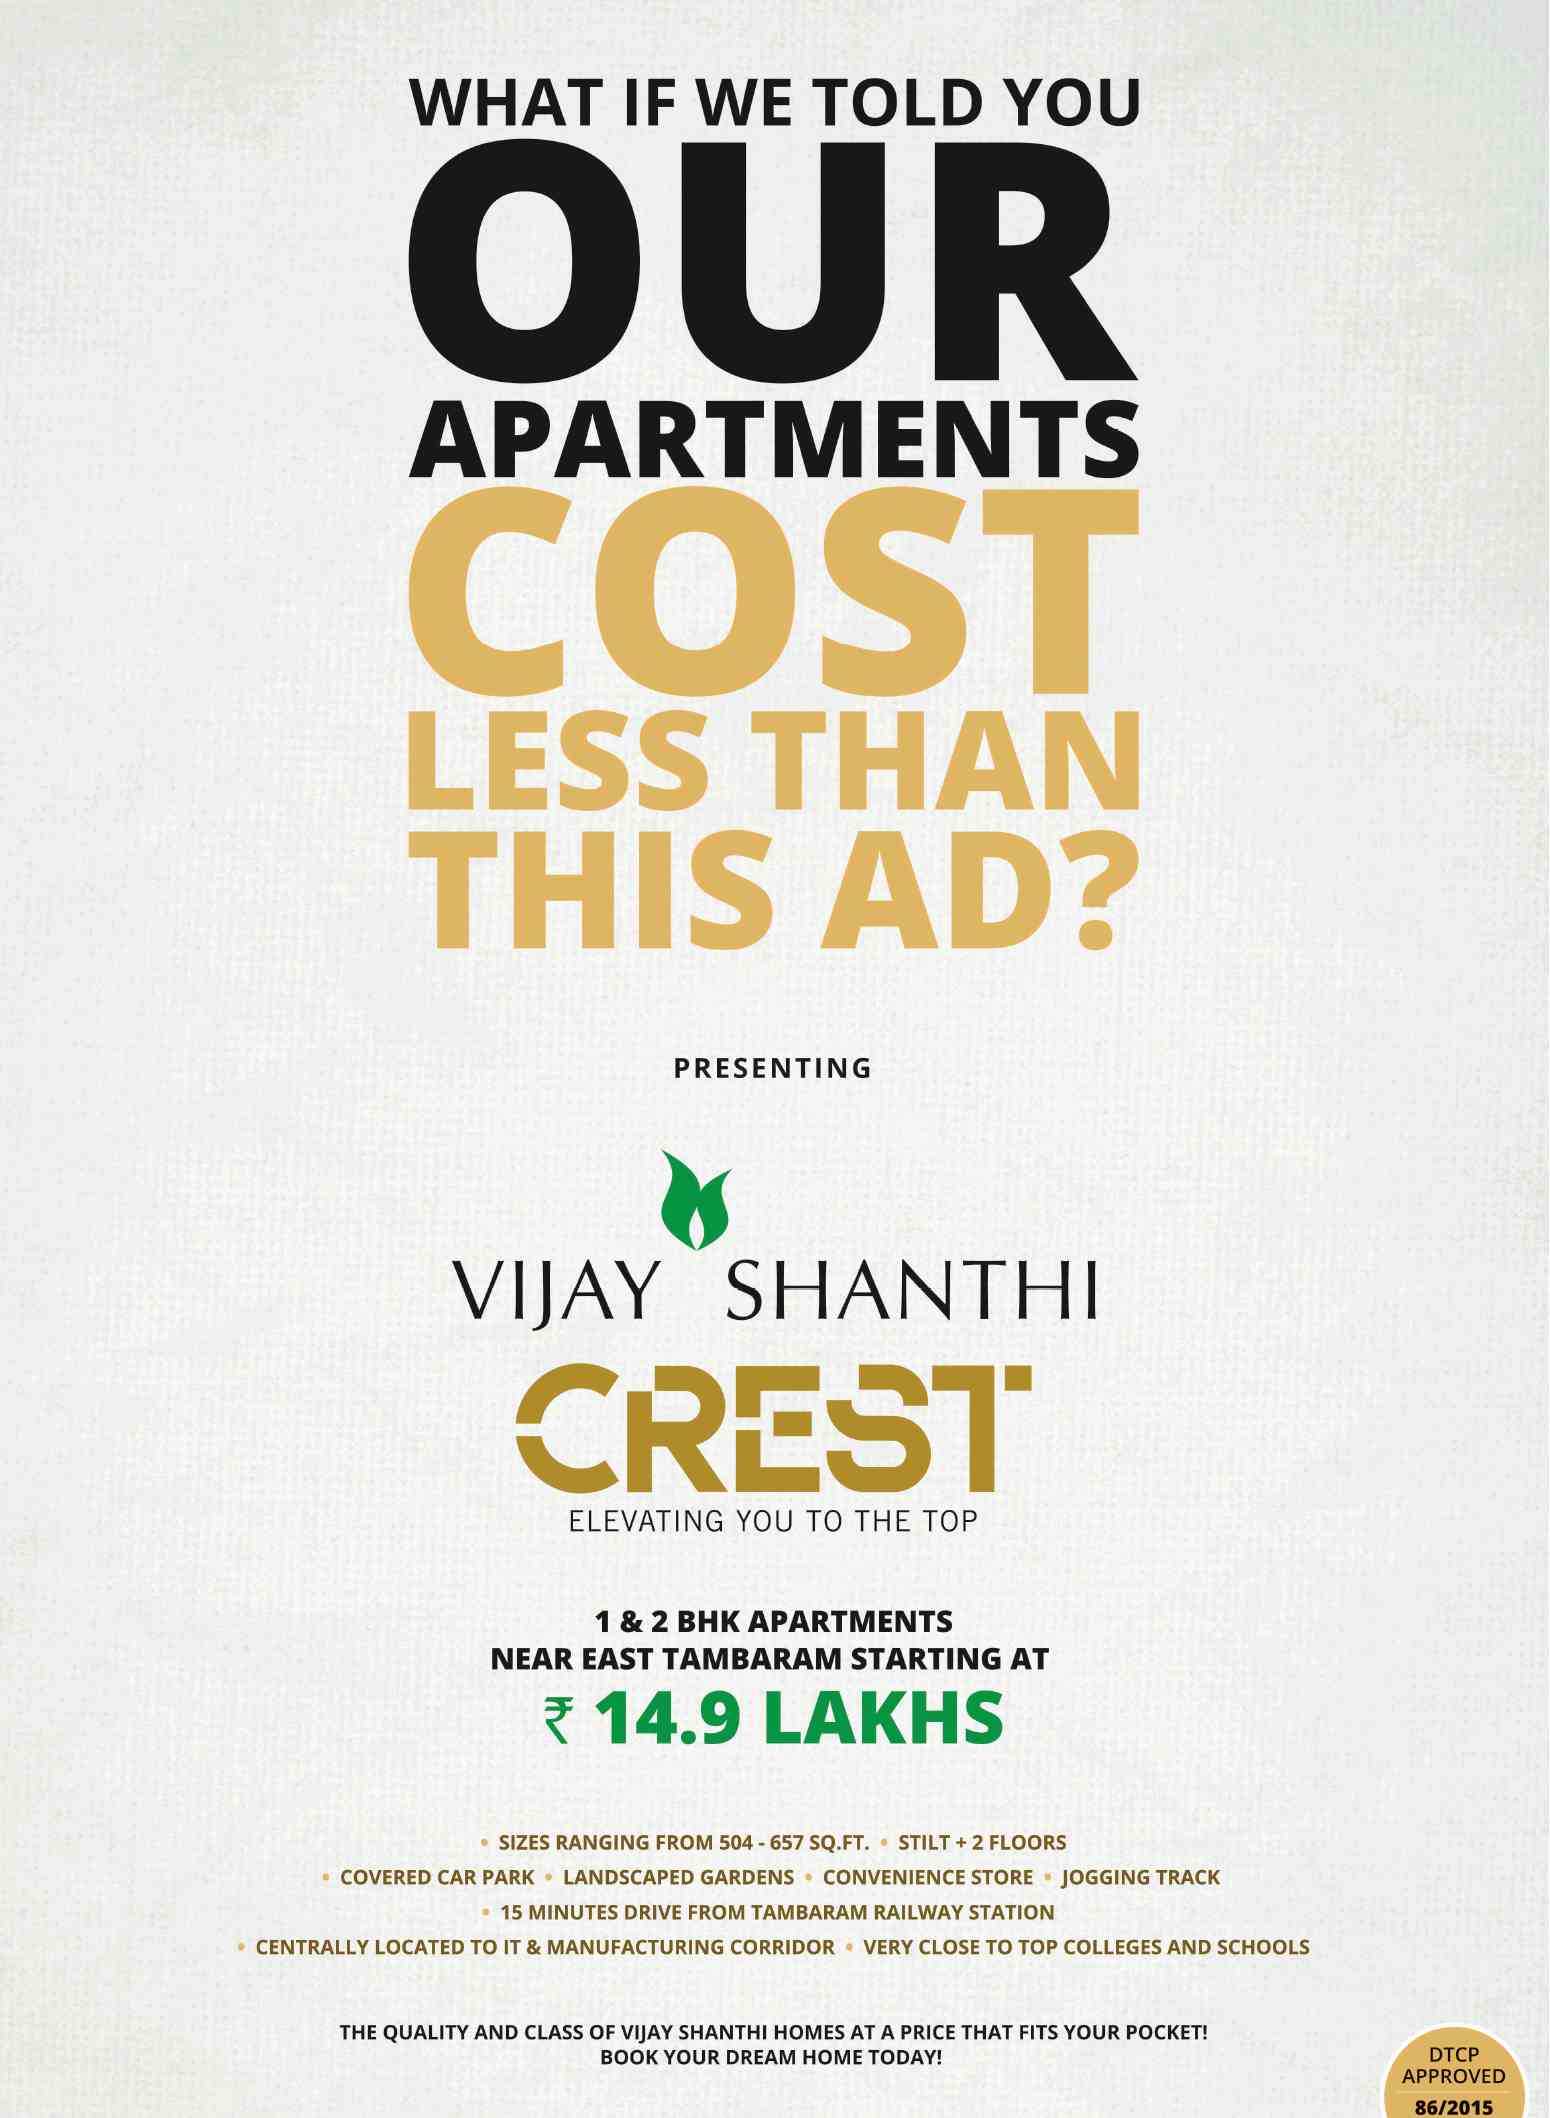 The quality and class of Vijay Shanthi Crest at a price that fits your pocket in Chennai